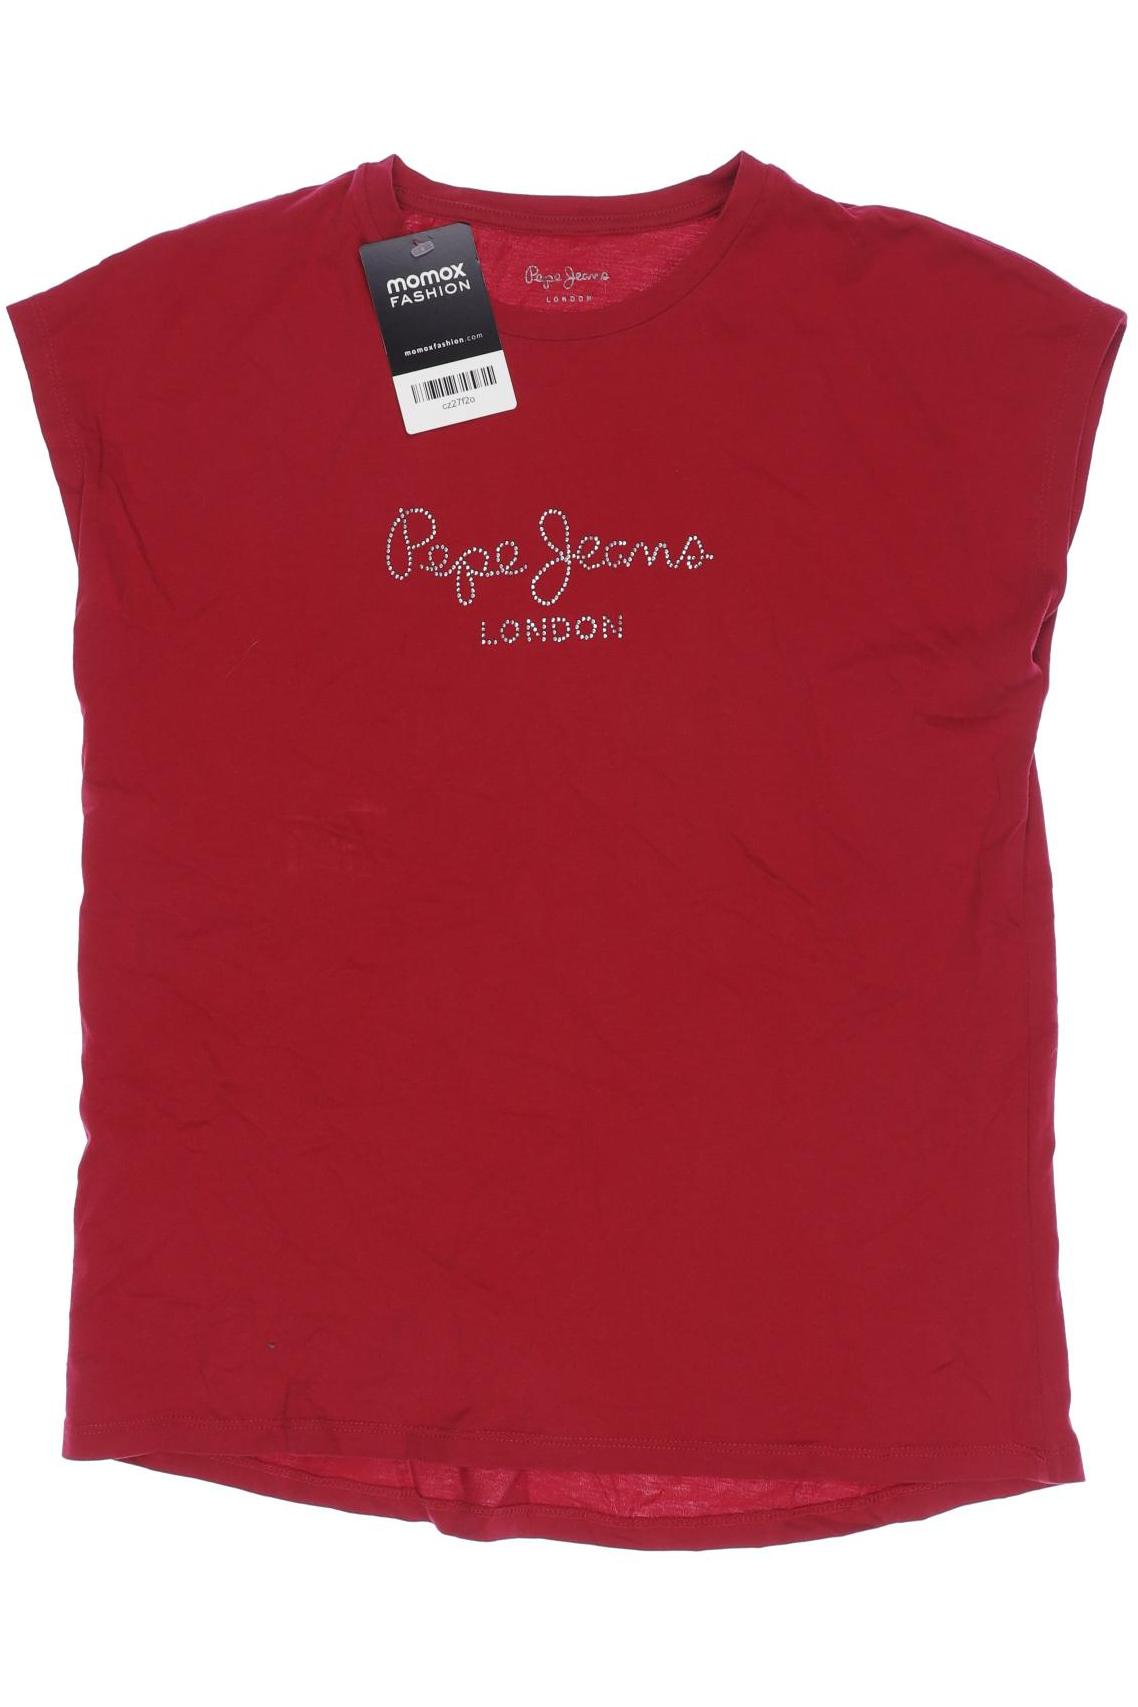 Pepe Jeans Mädchen T-Shirt, rot von Pepe Jeans